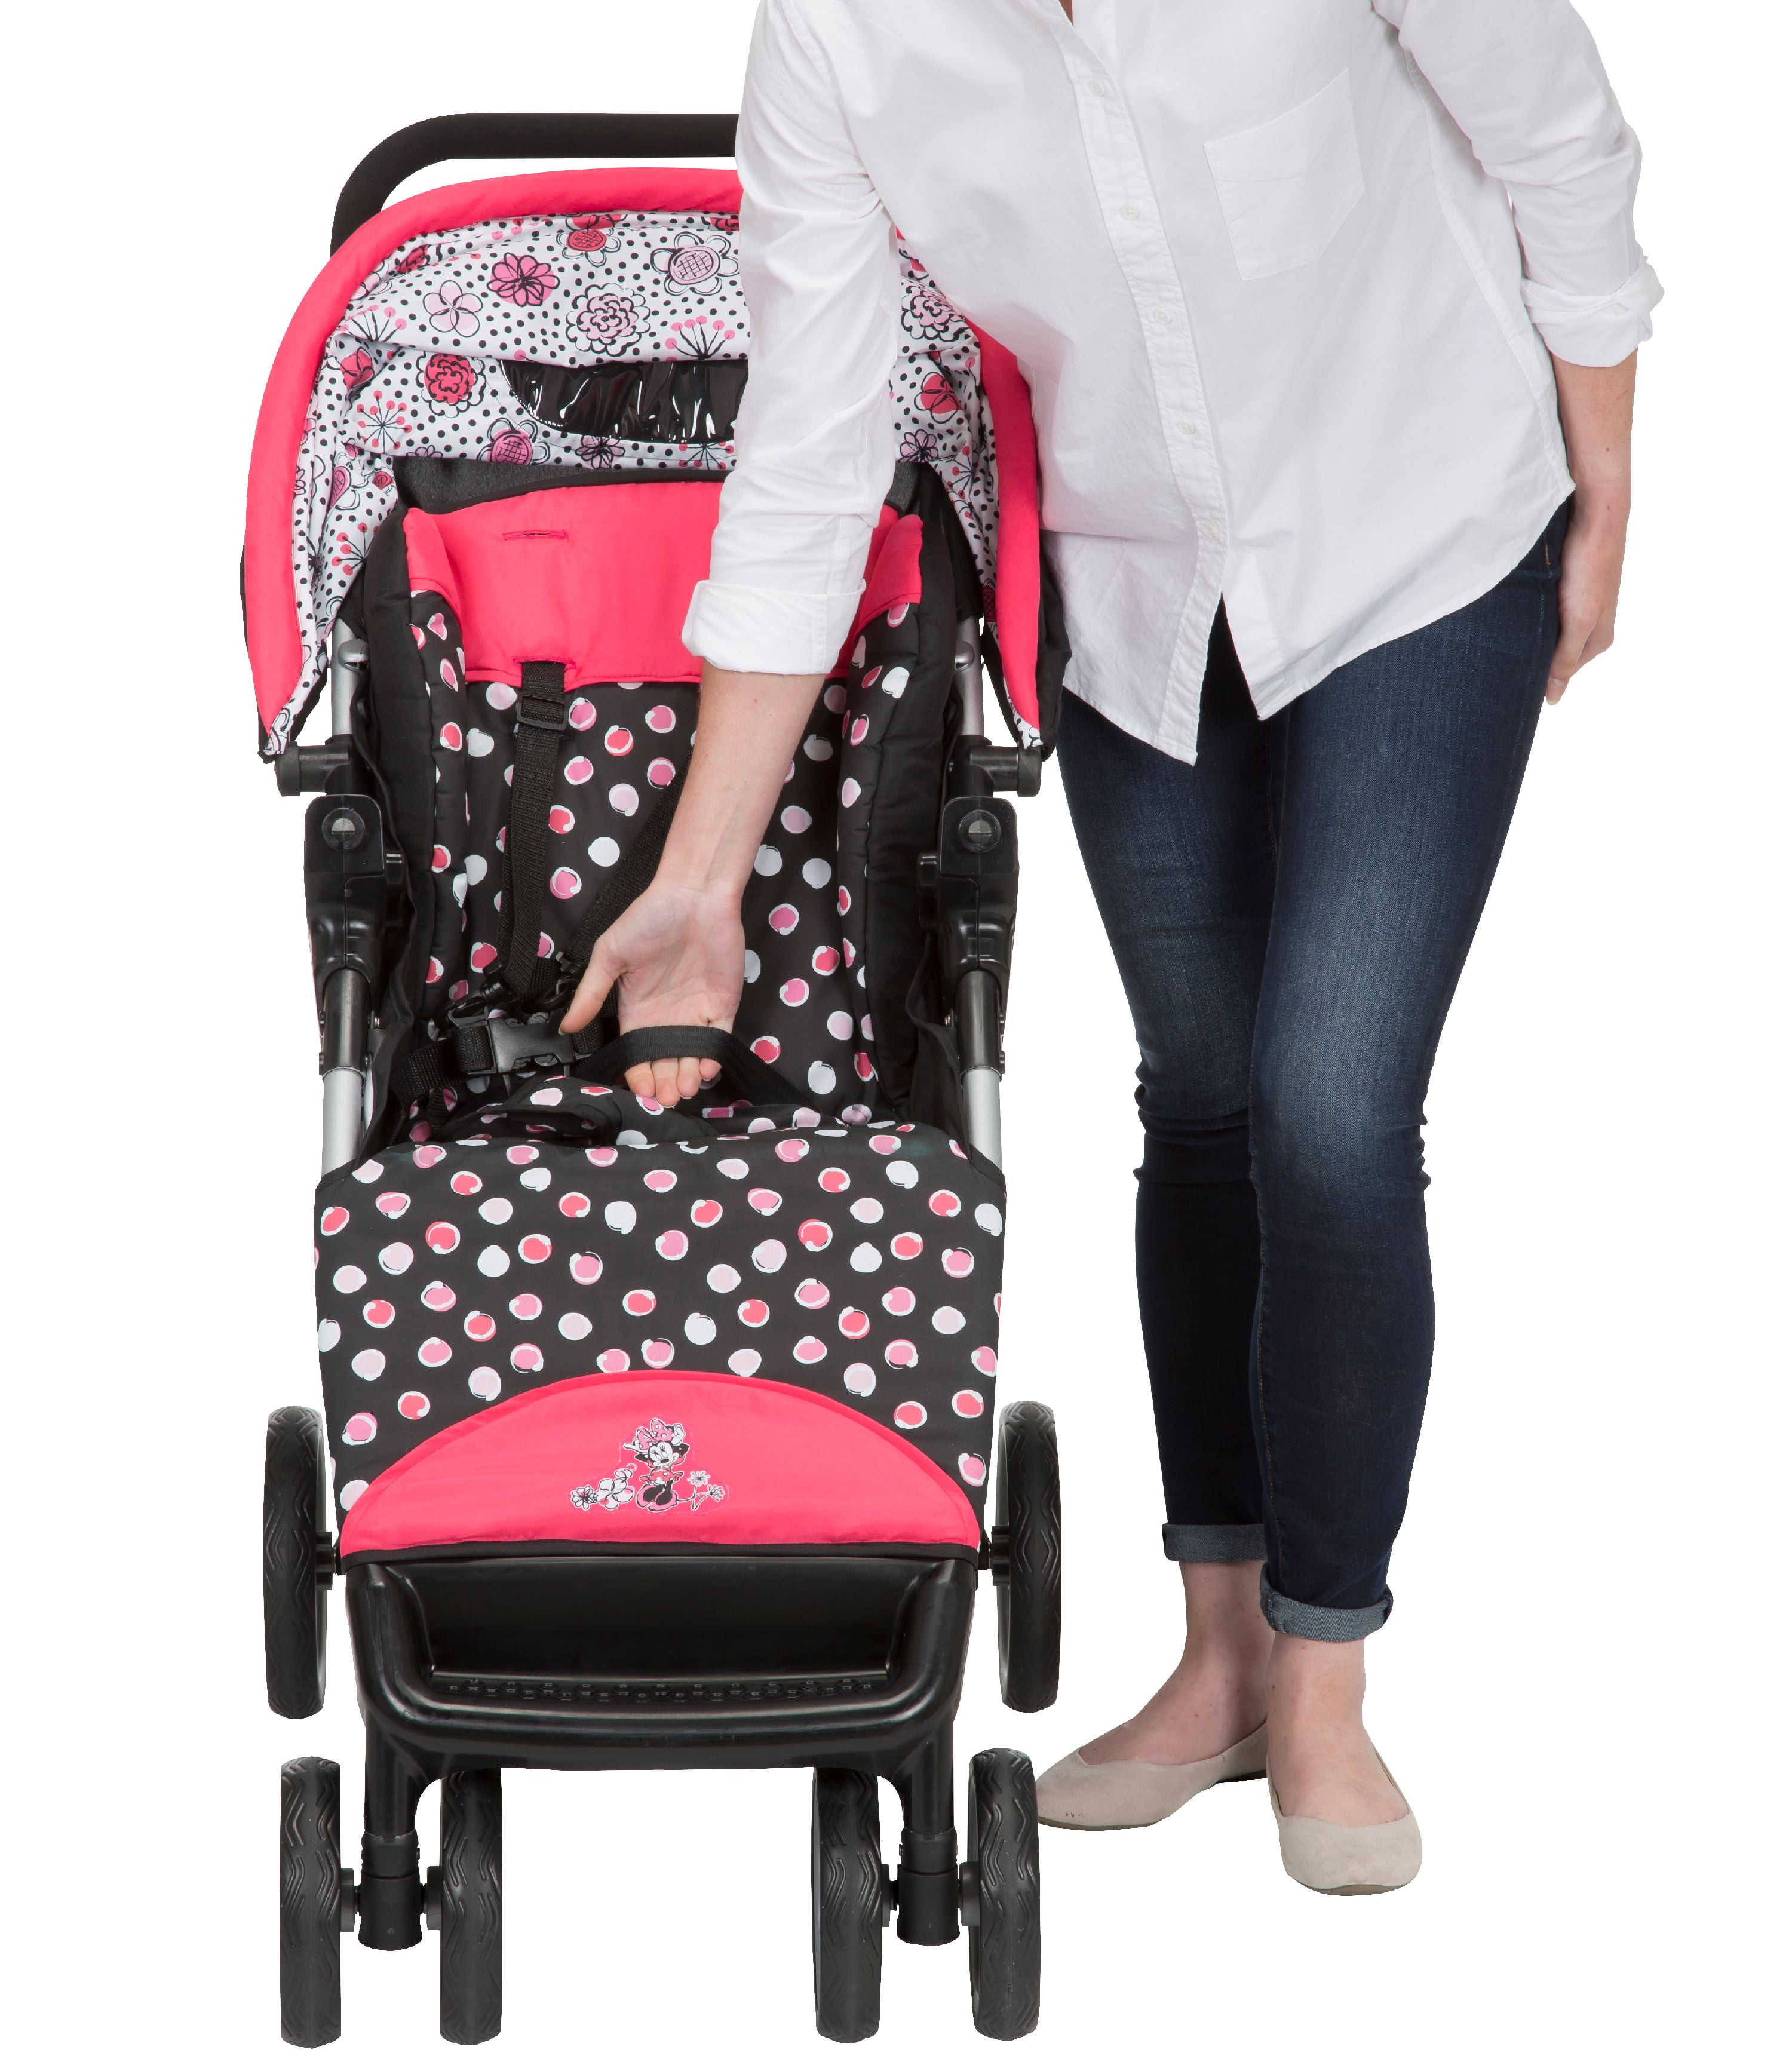 minnie mouse simple fold travel system